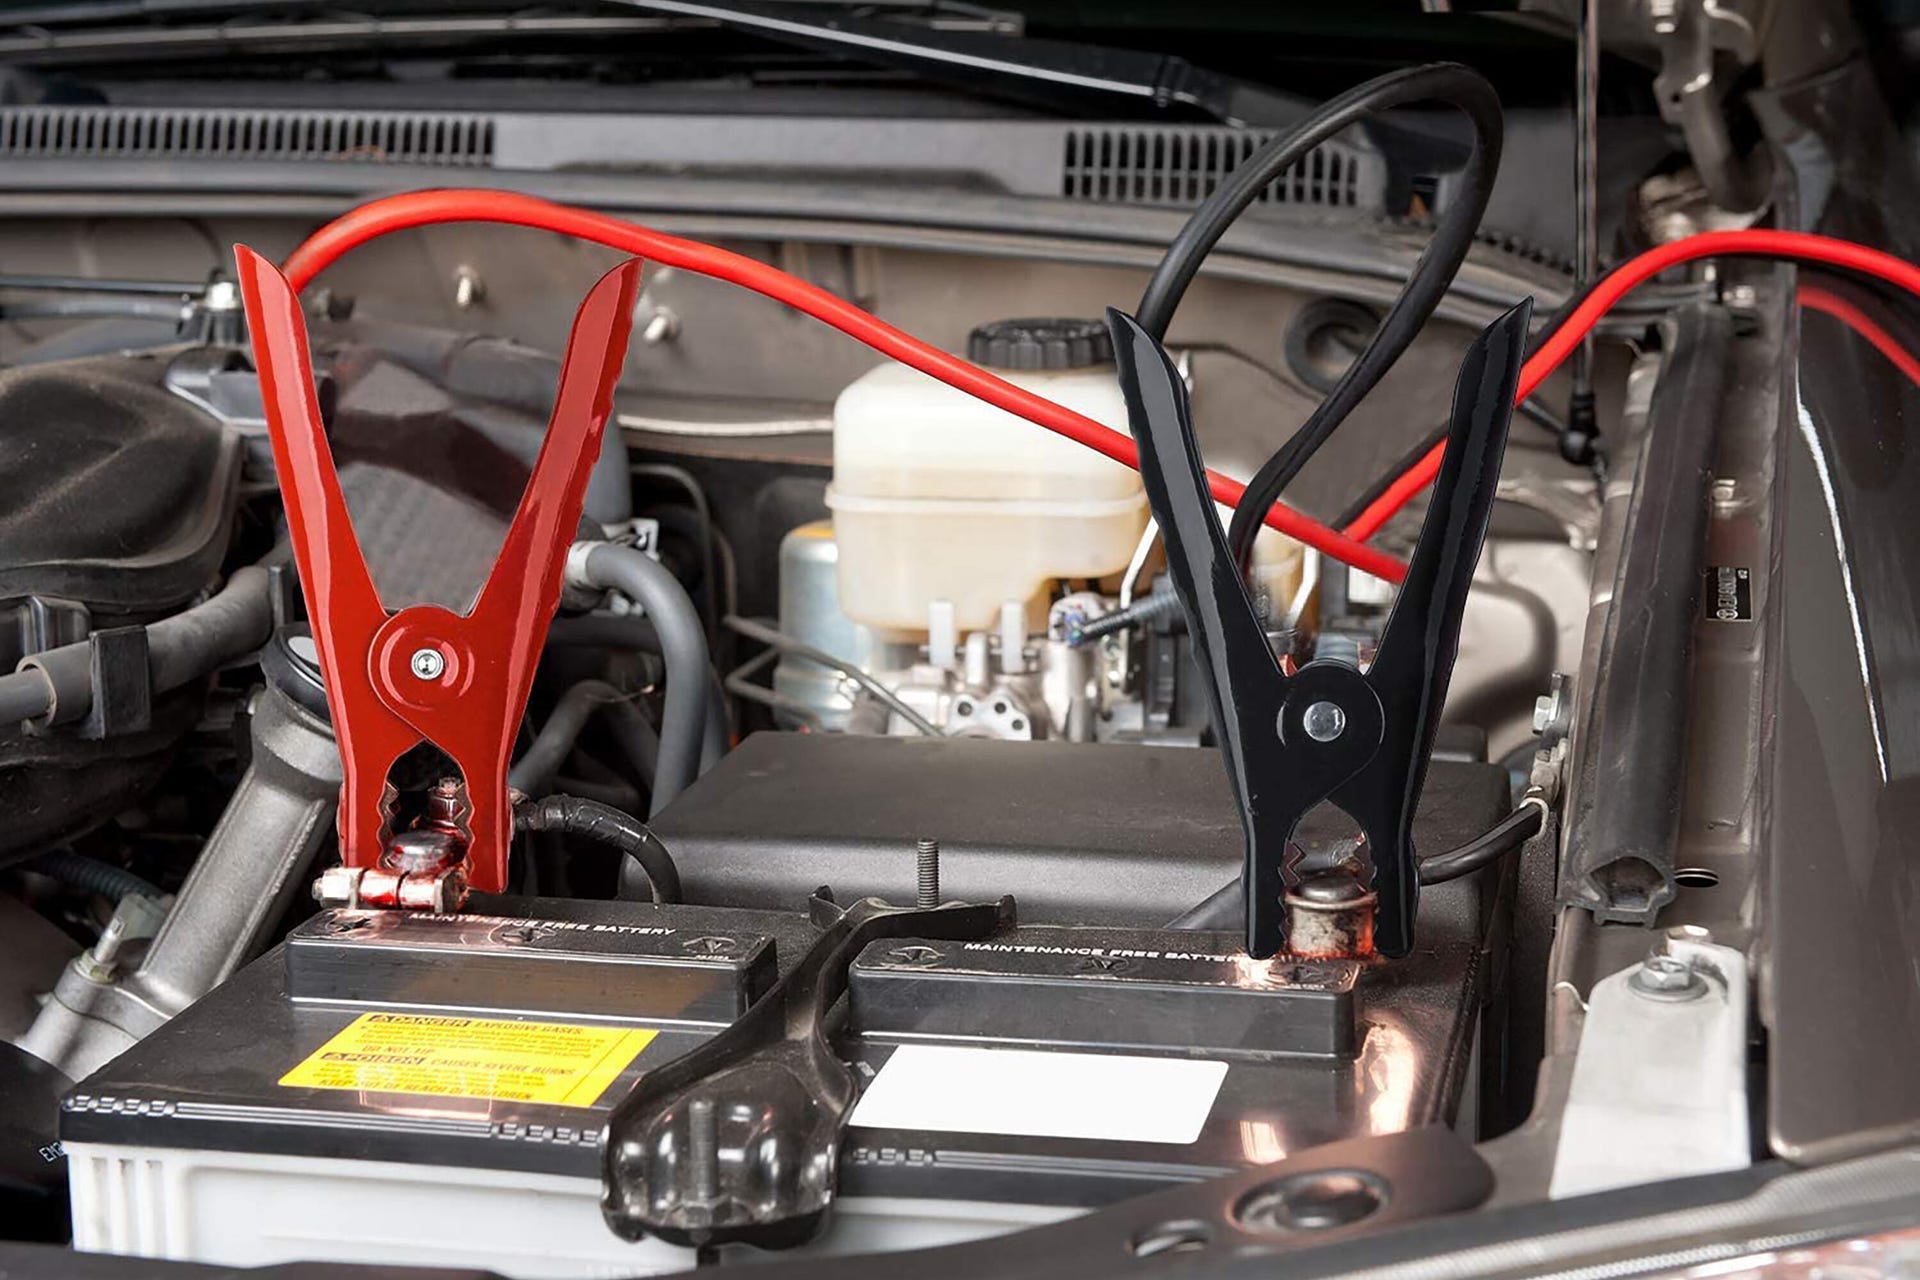 Jumper cables clamped on a car battery